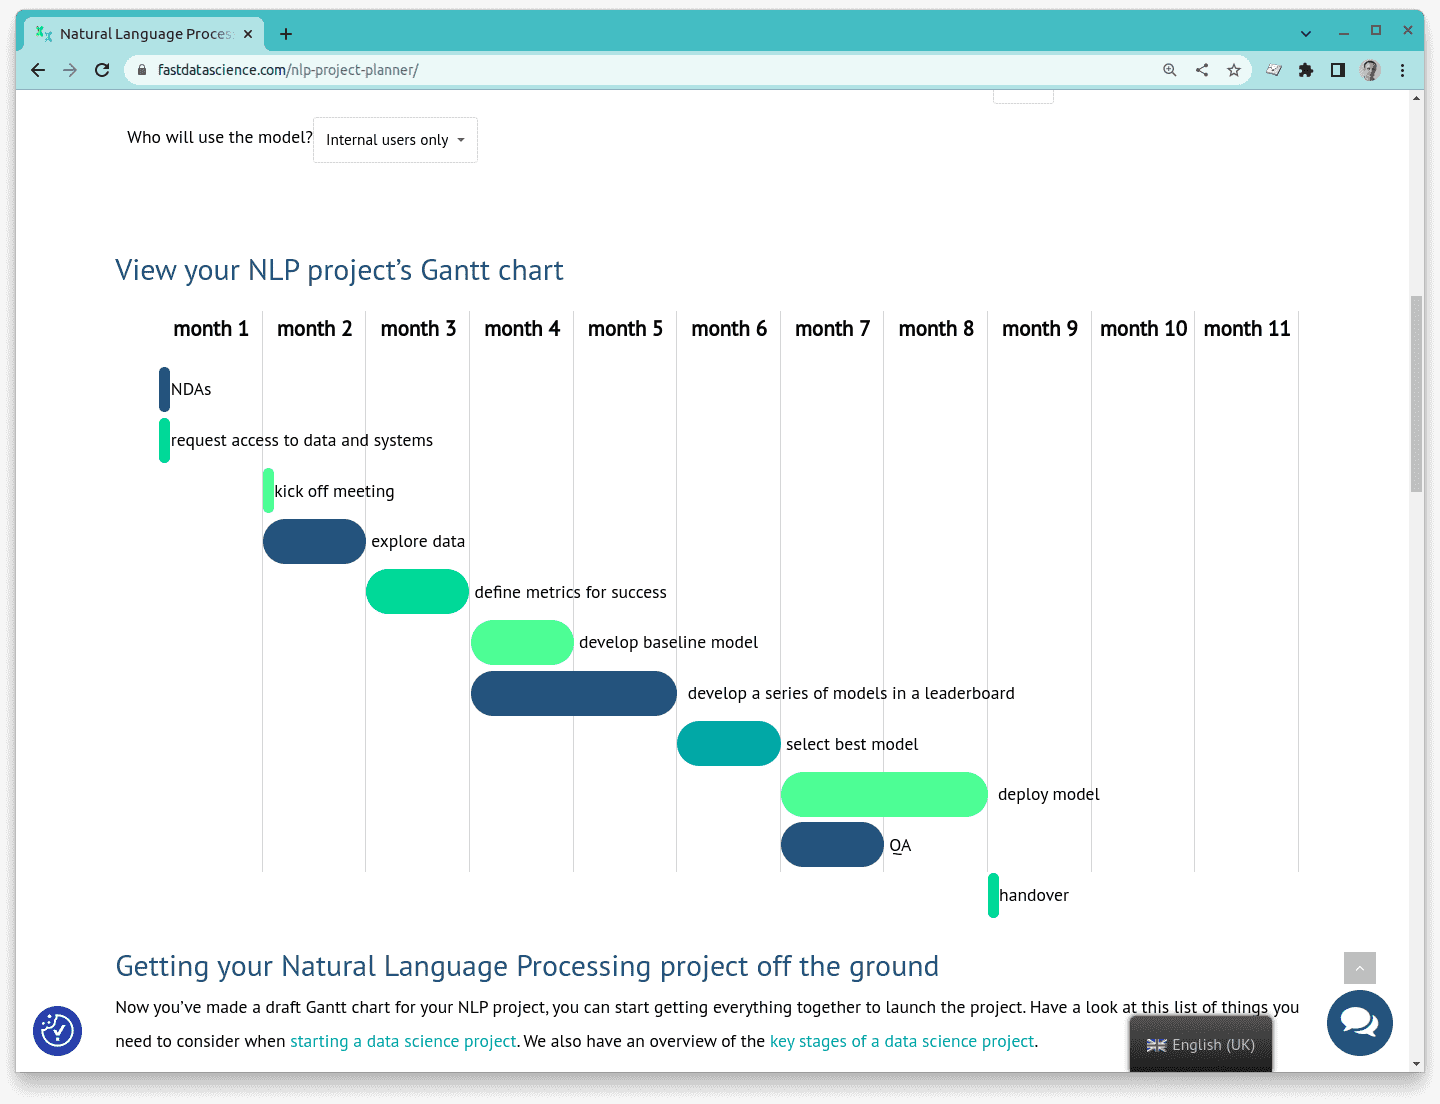 machine learning consulting nlp project planner